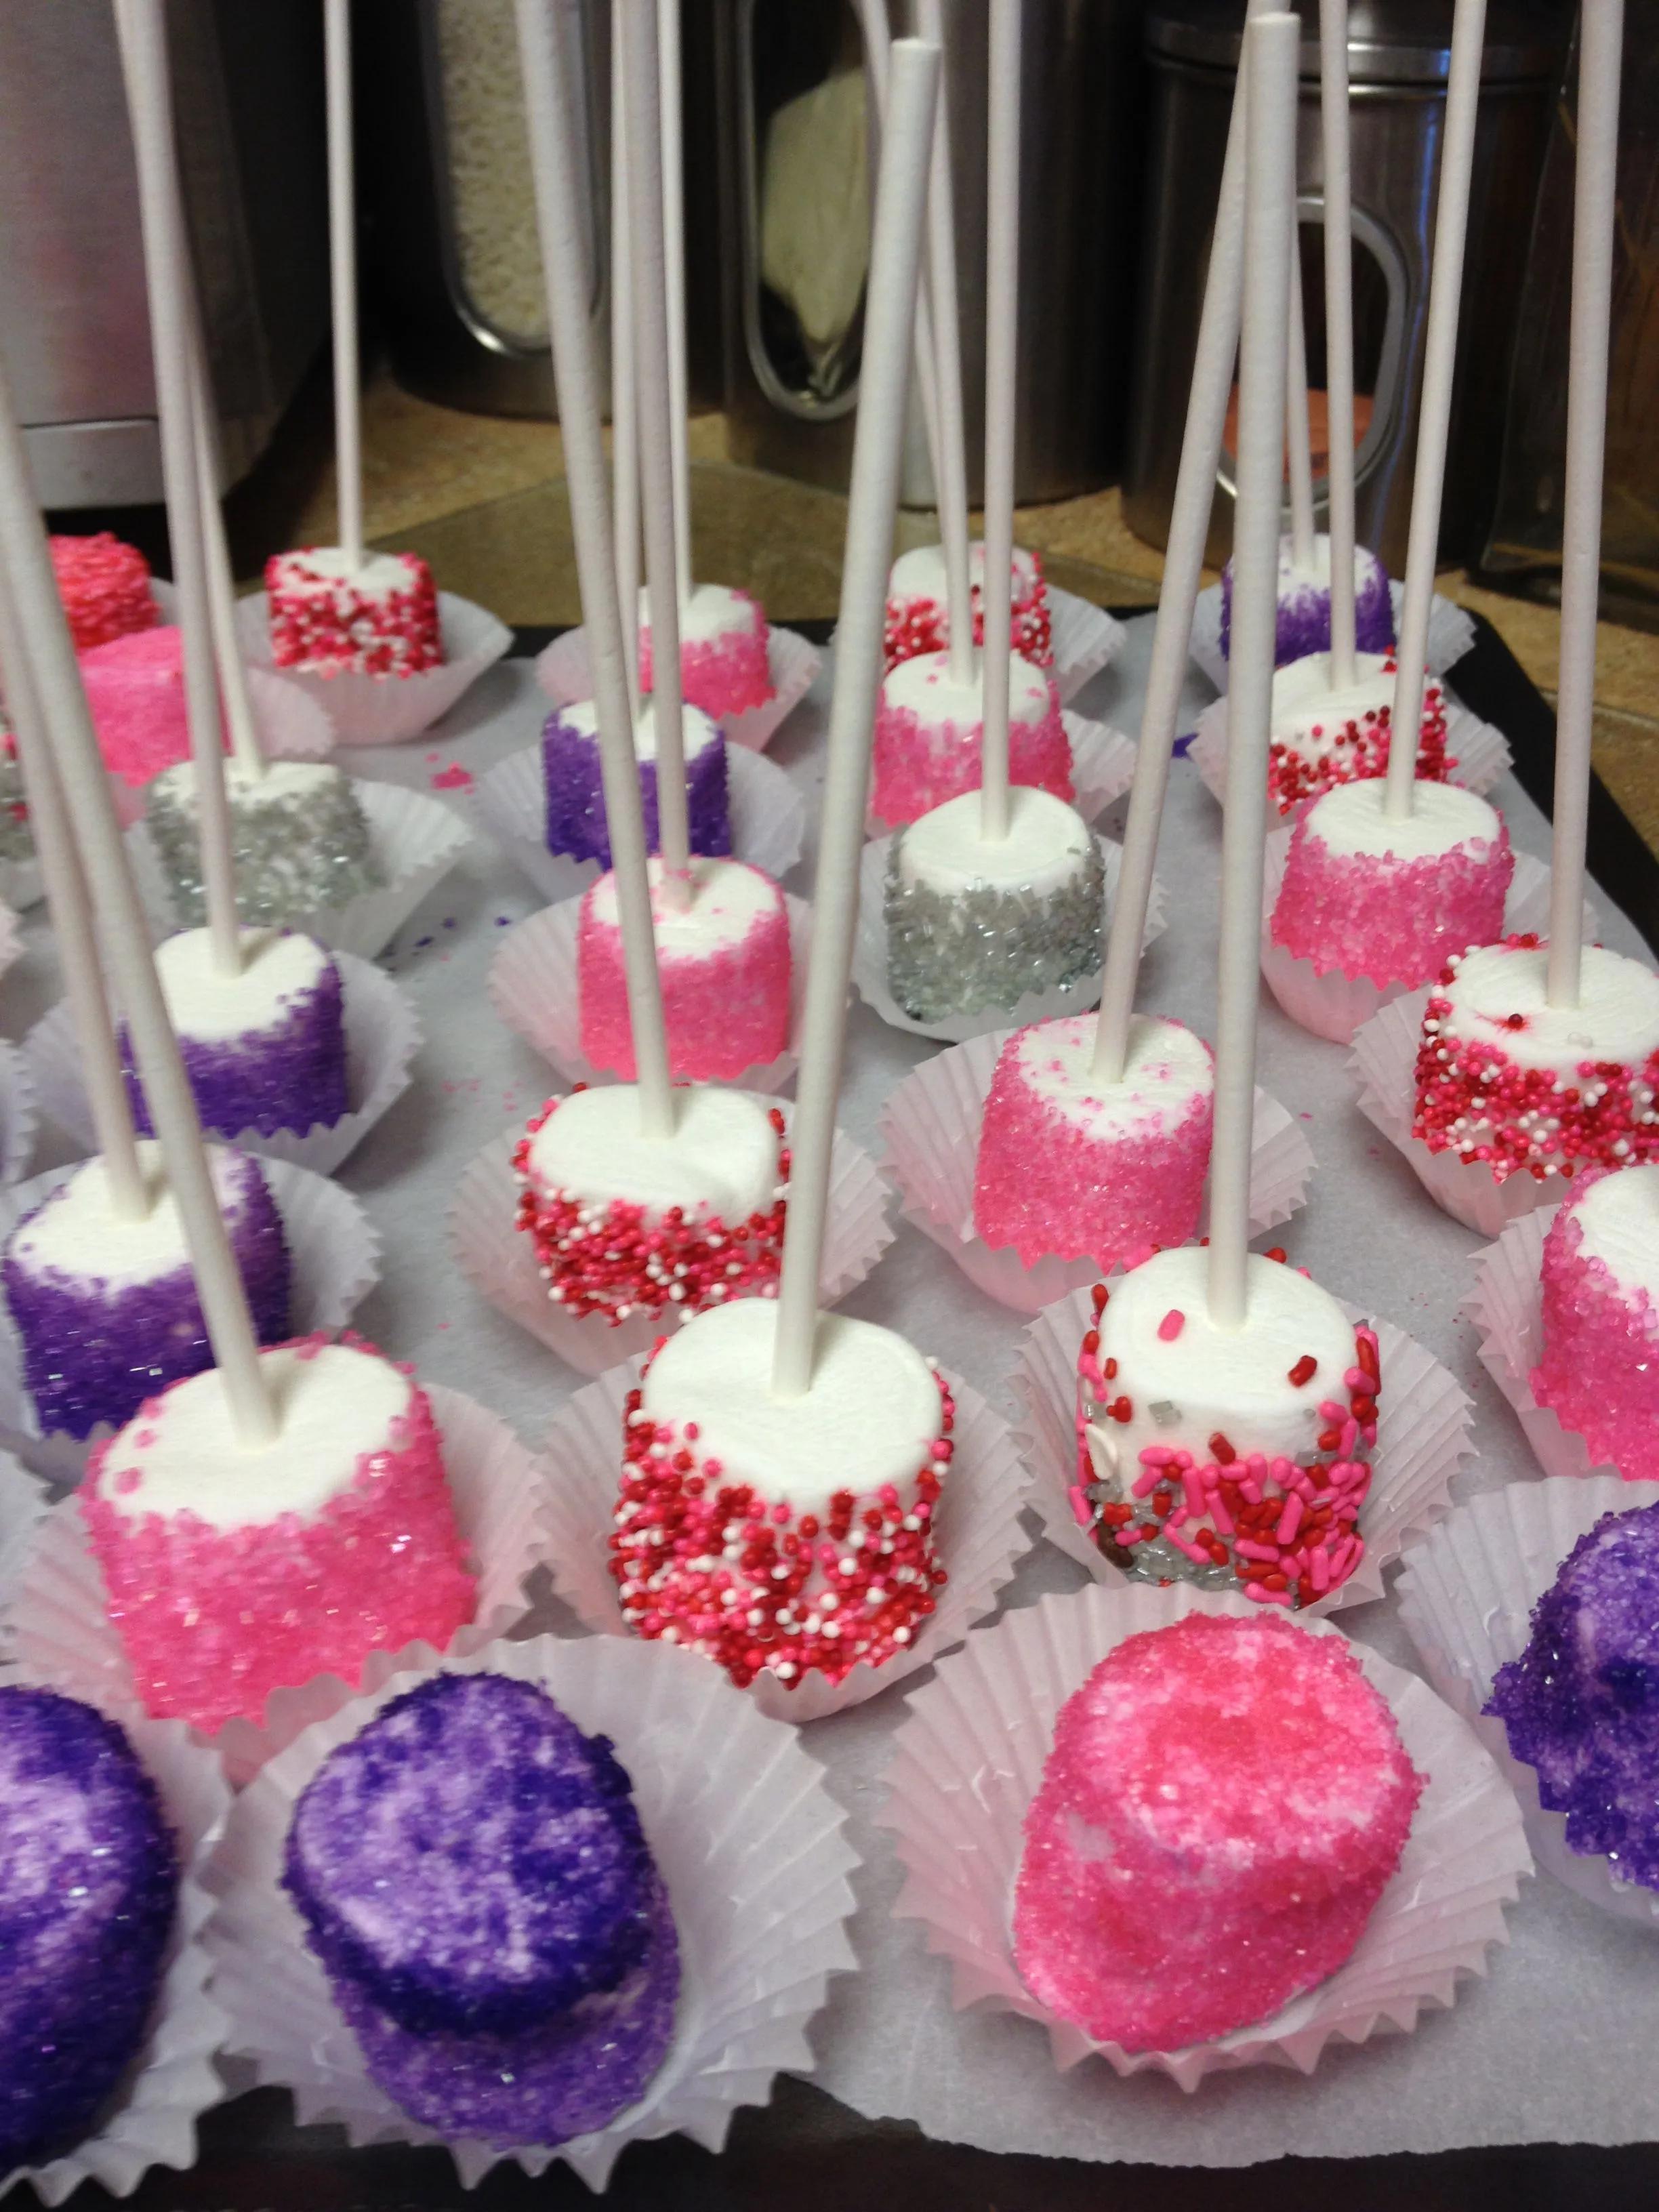 Marshmallows dipped in sprinkles!